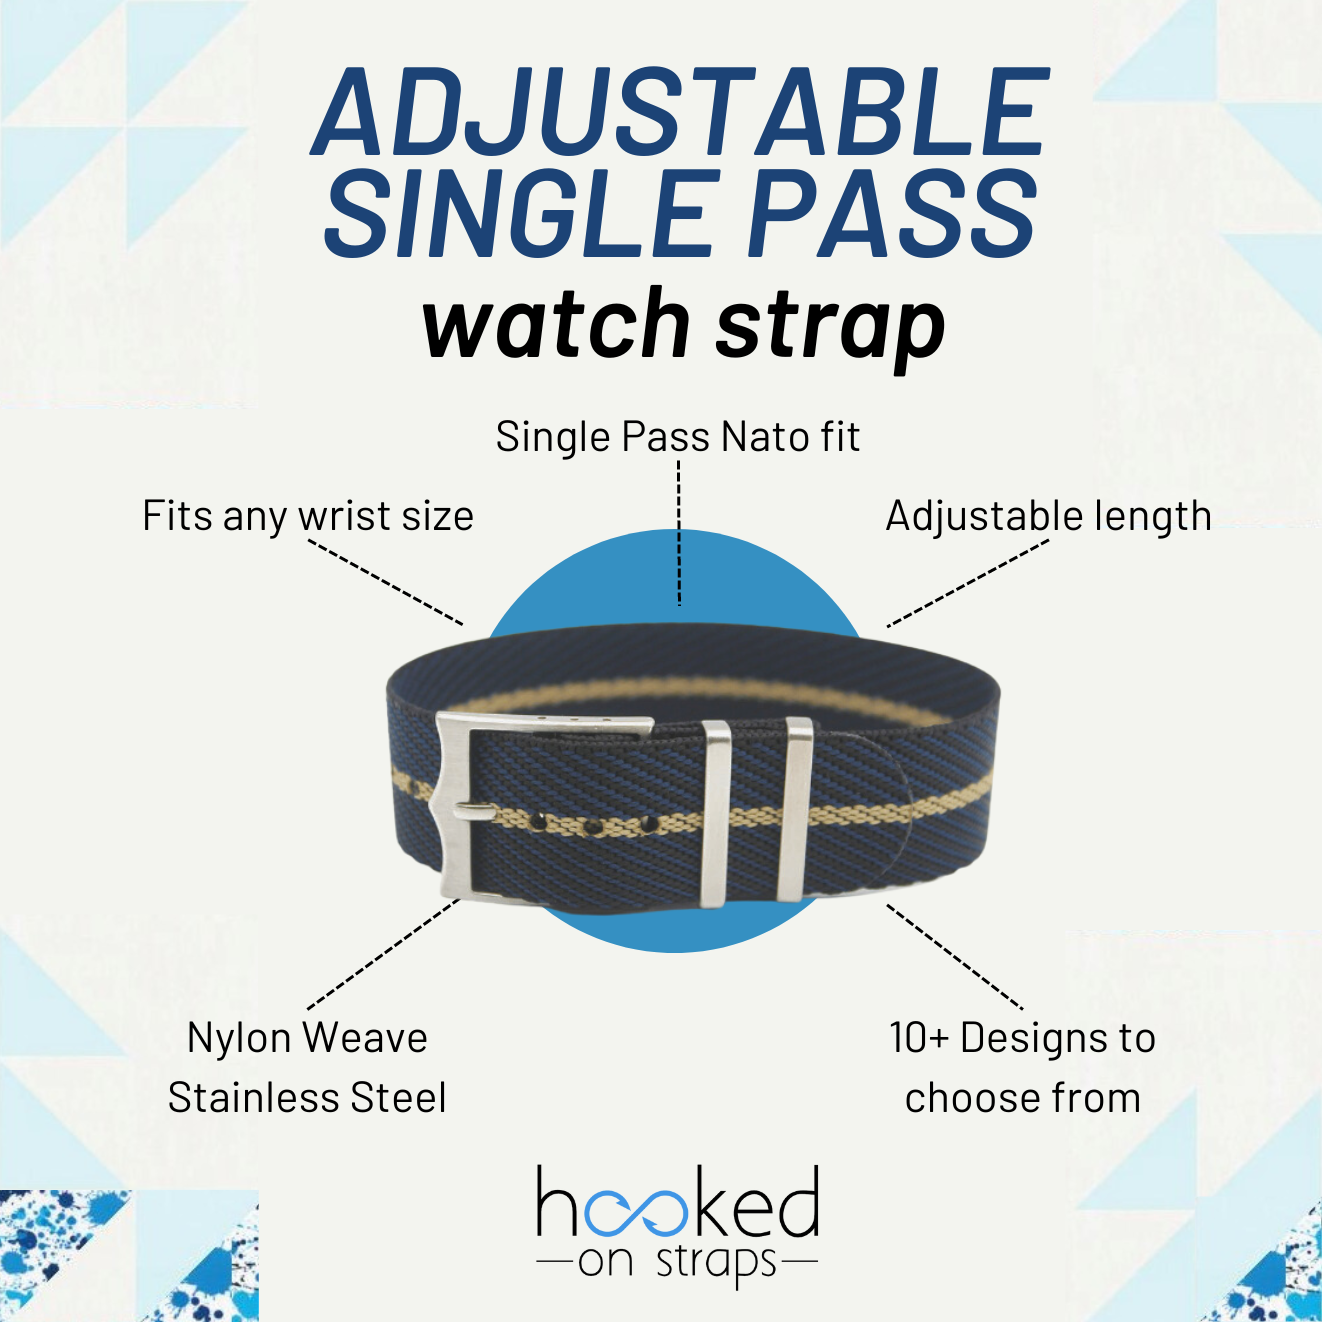 features of single pass nato strap